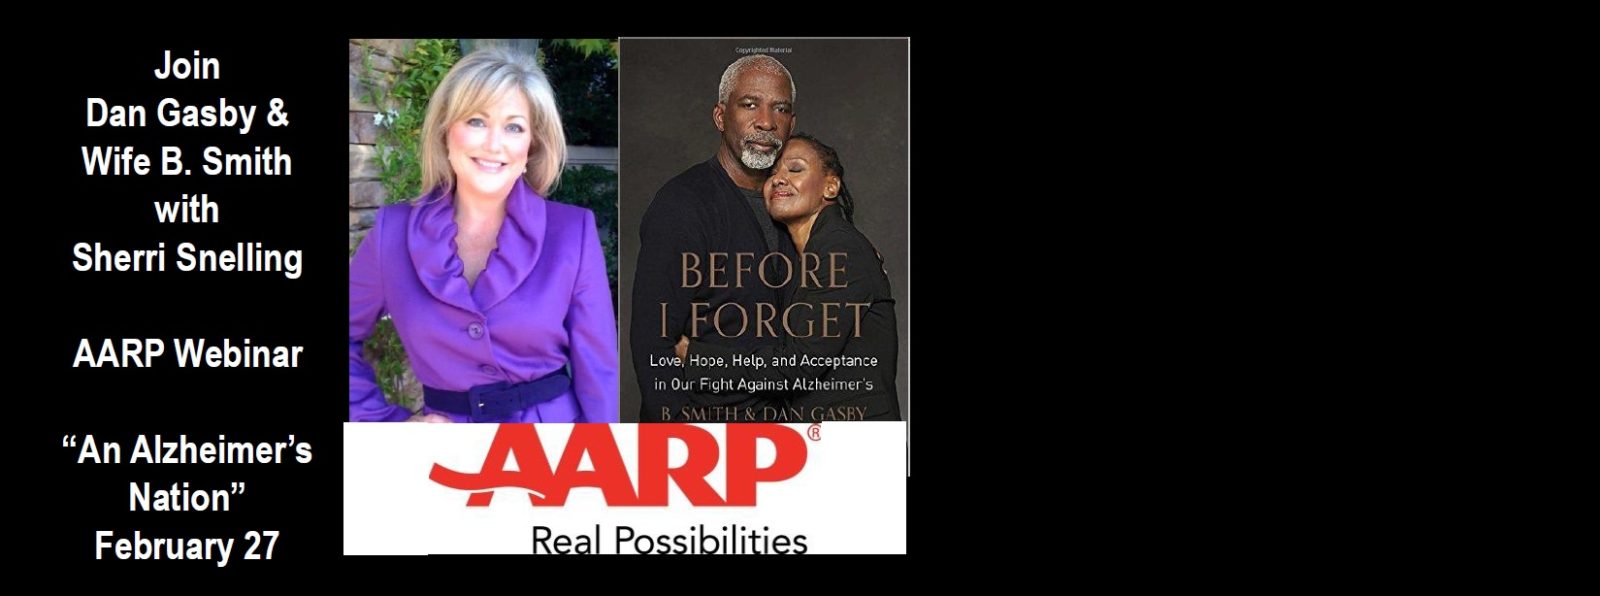 AARP Webinar – Caregiving Conversation with Dan Gasby and B. Smith